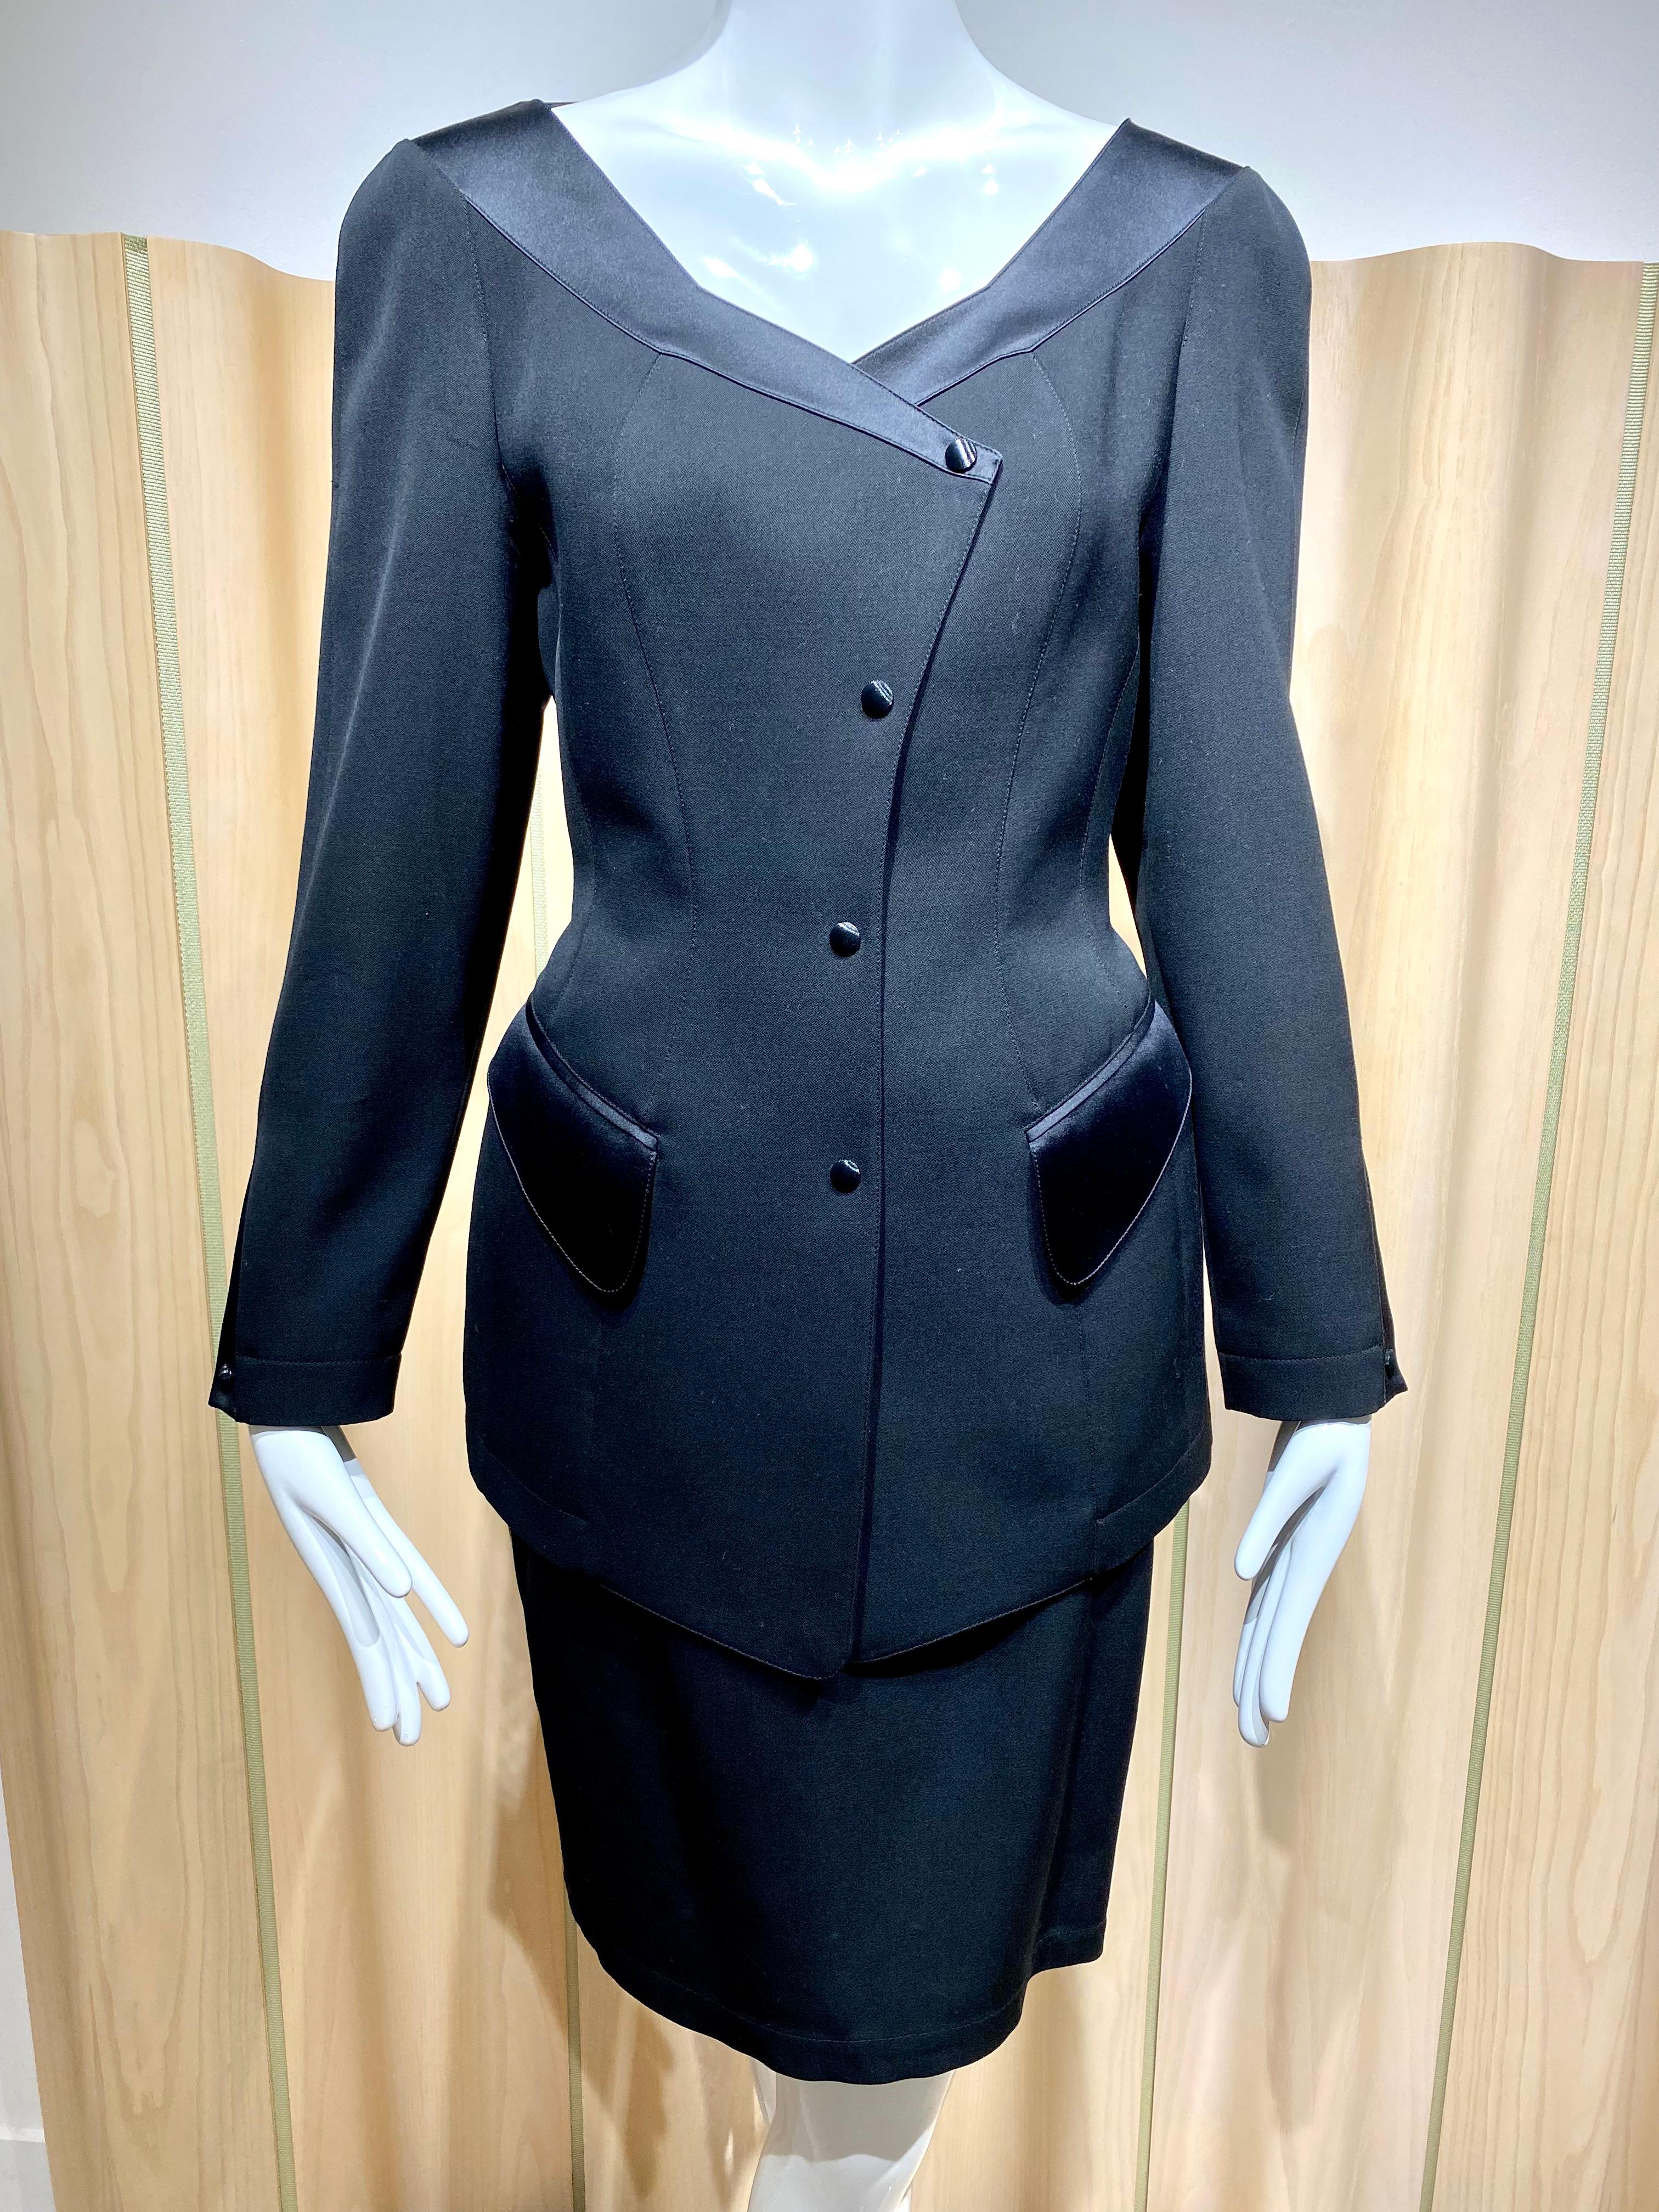 Vintage Thierry Mugler  Black Fitted Peplum Jacket suit In Good Condition For Sale In Beverly Hills, CA